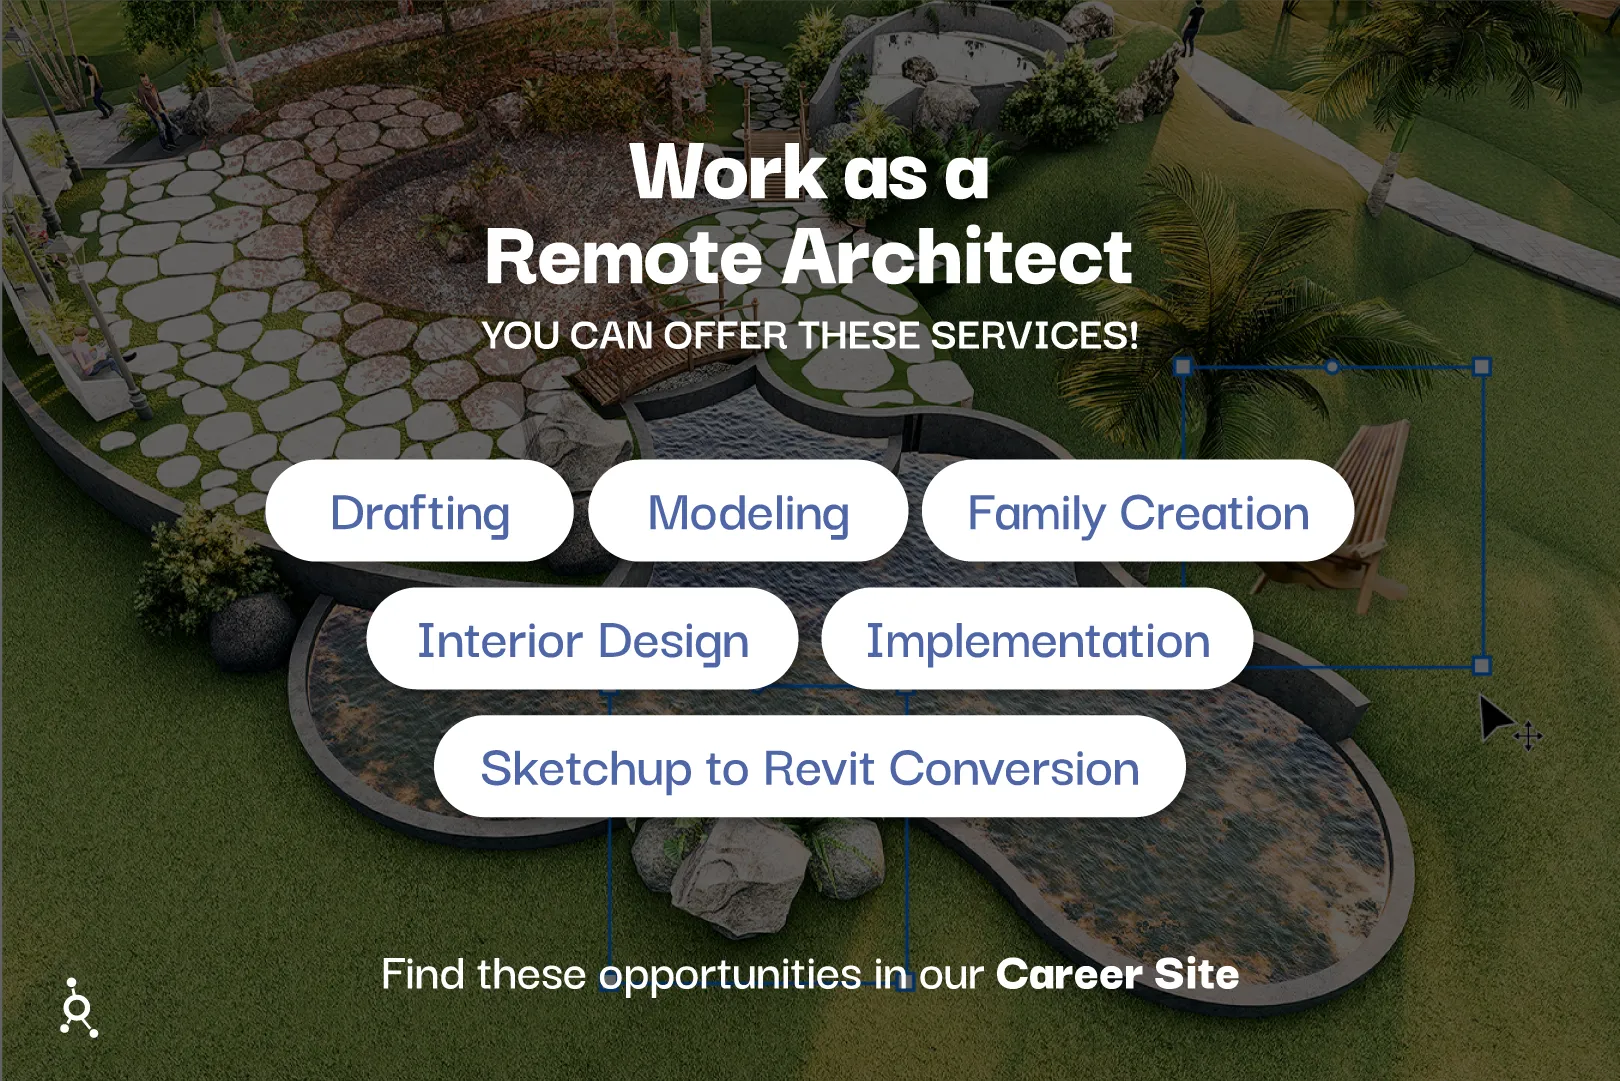 Work as a Remote Architect